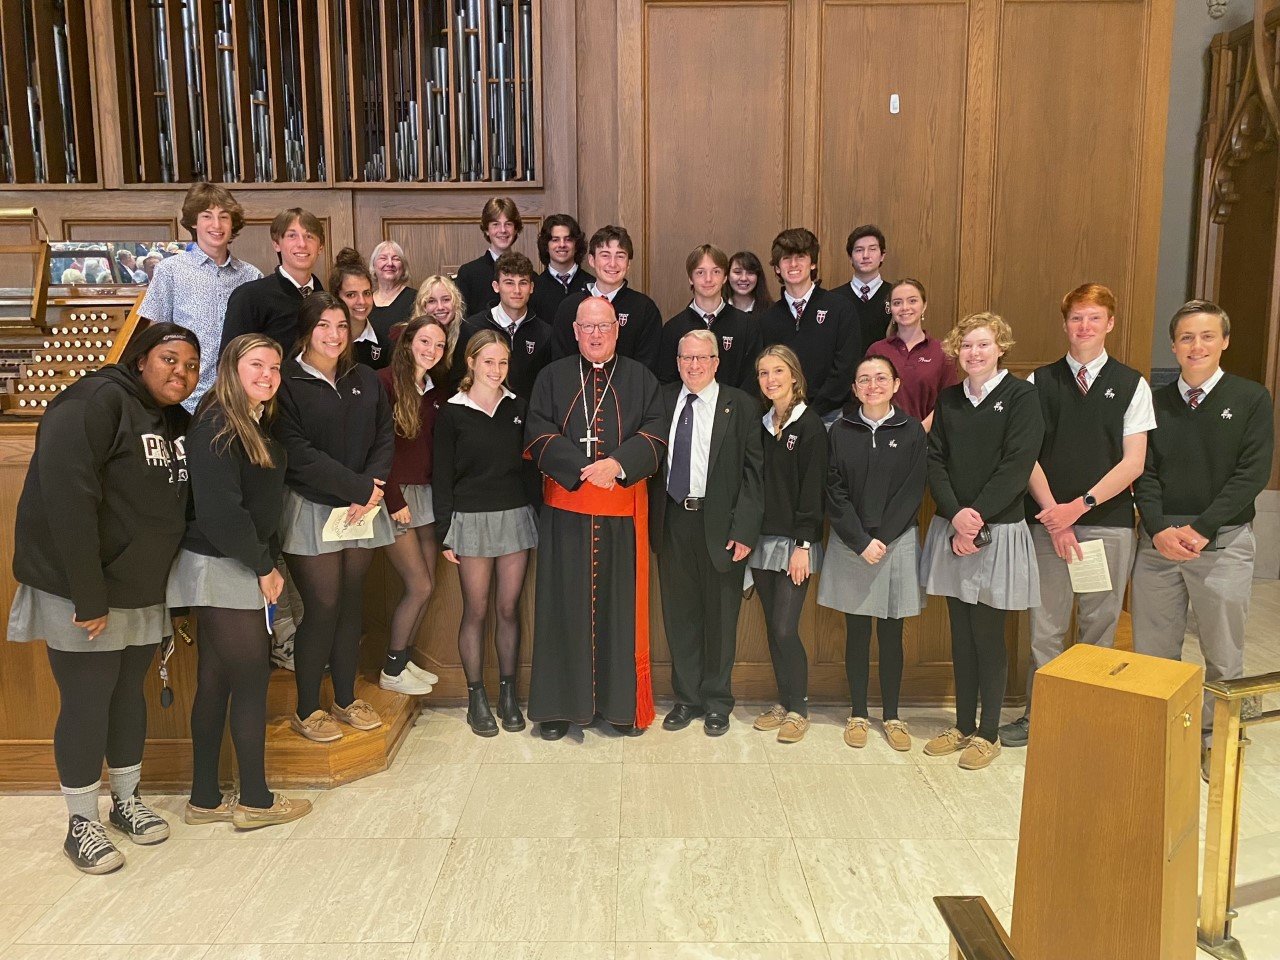 Students from The Prout School made the trip to Providence to join Cathedral Organist Philip Faraone in song and to listen to Cardinal Dolan’s important message at the 150-anniversary celebration event.